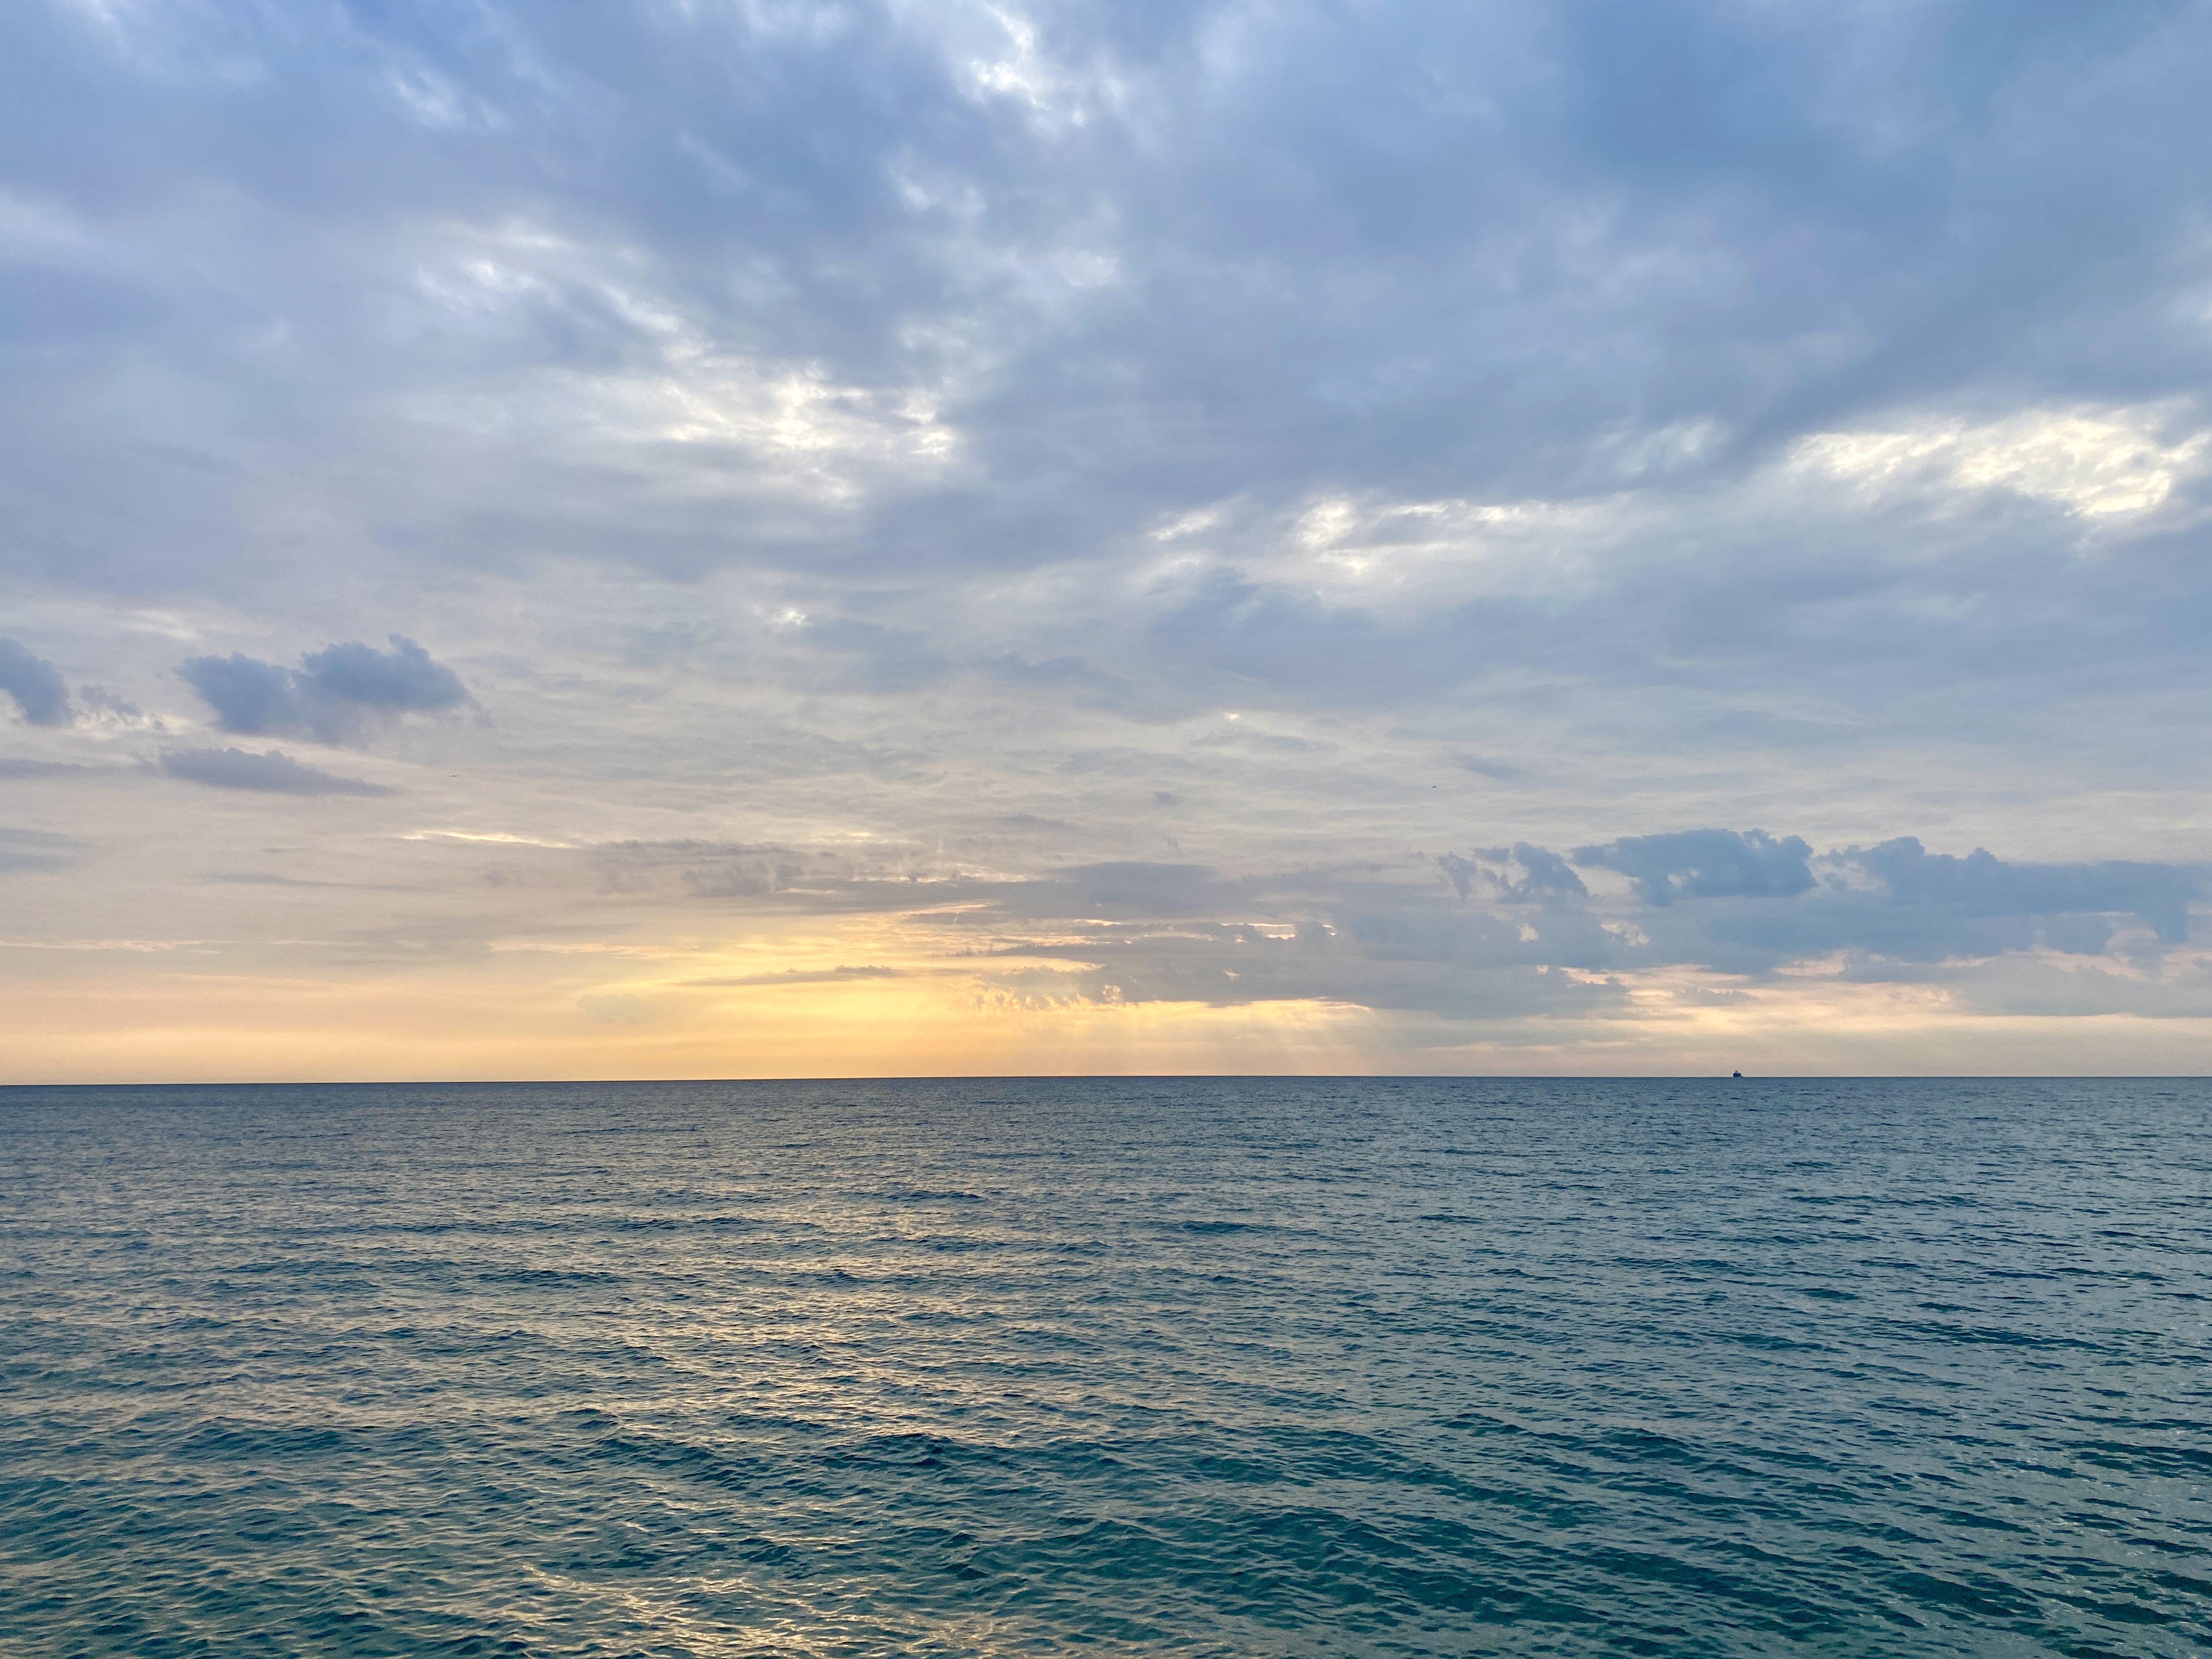 A wide lake horizon with a lightly clouded sky, orange sunrise breaking through, and a moderately calm dark blue lake surface